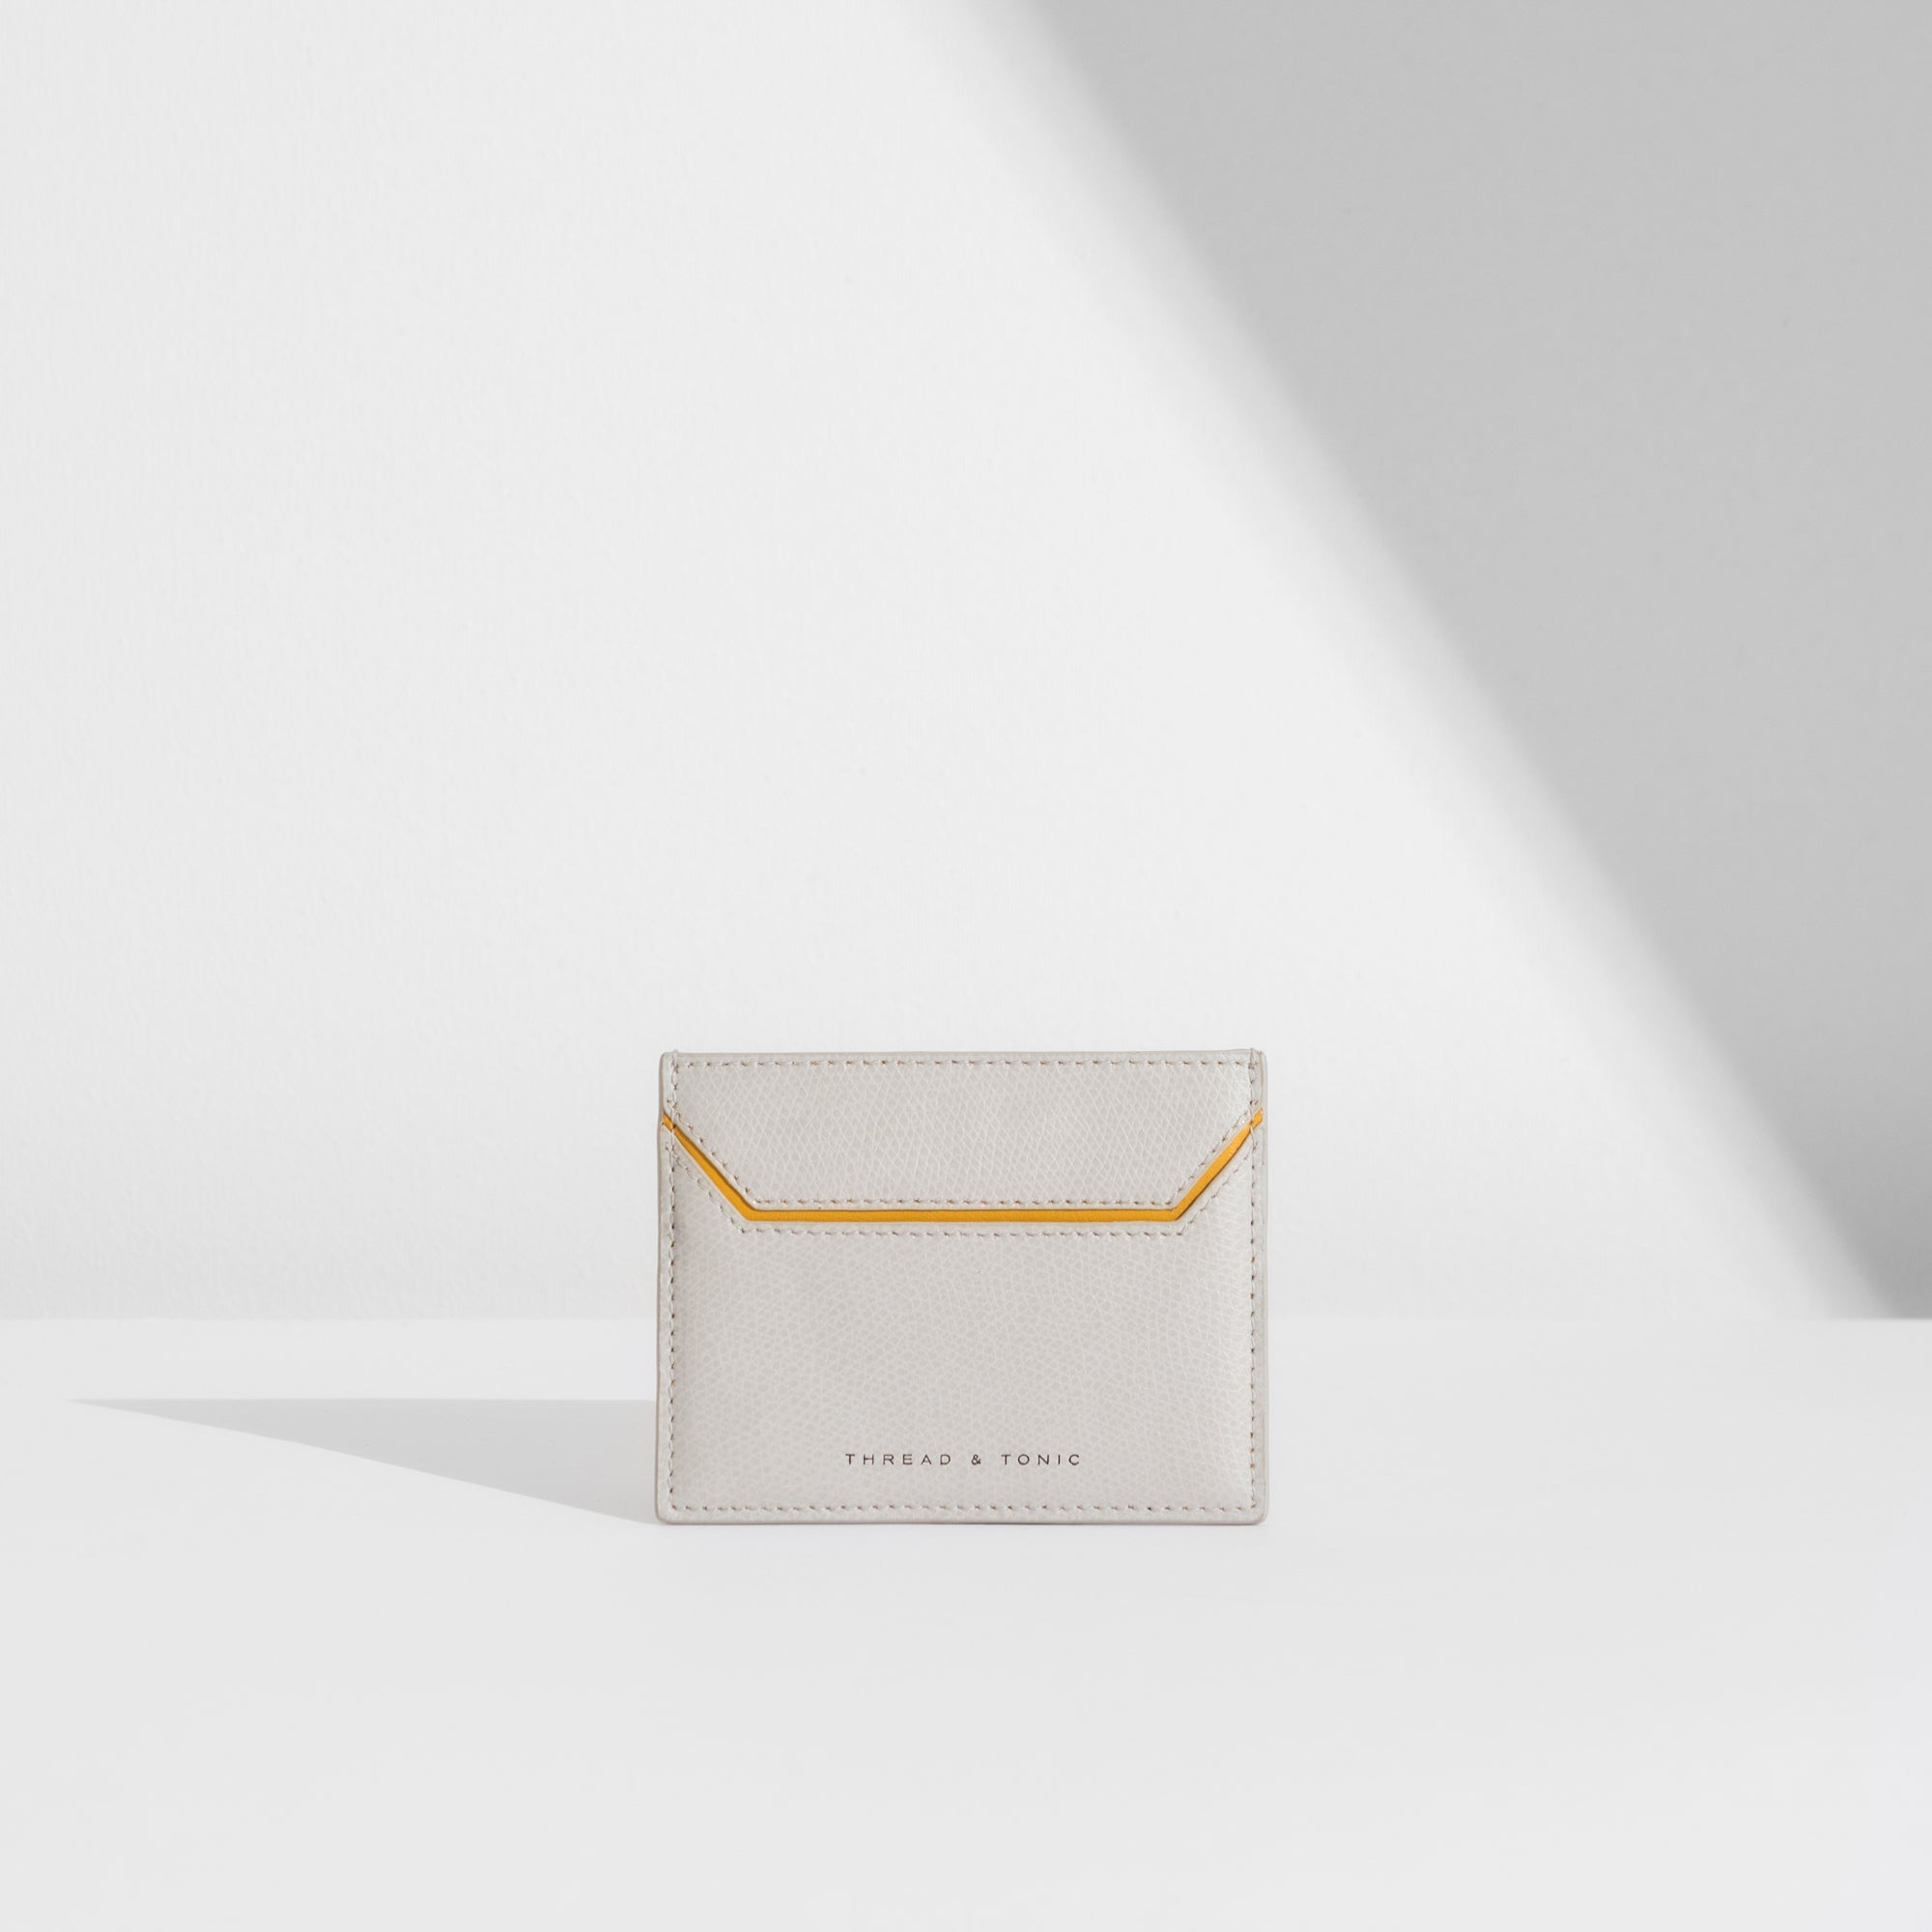 THE CARD HOLDER